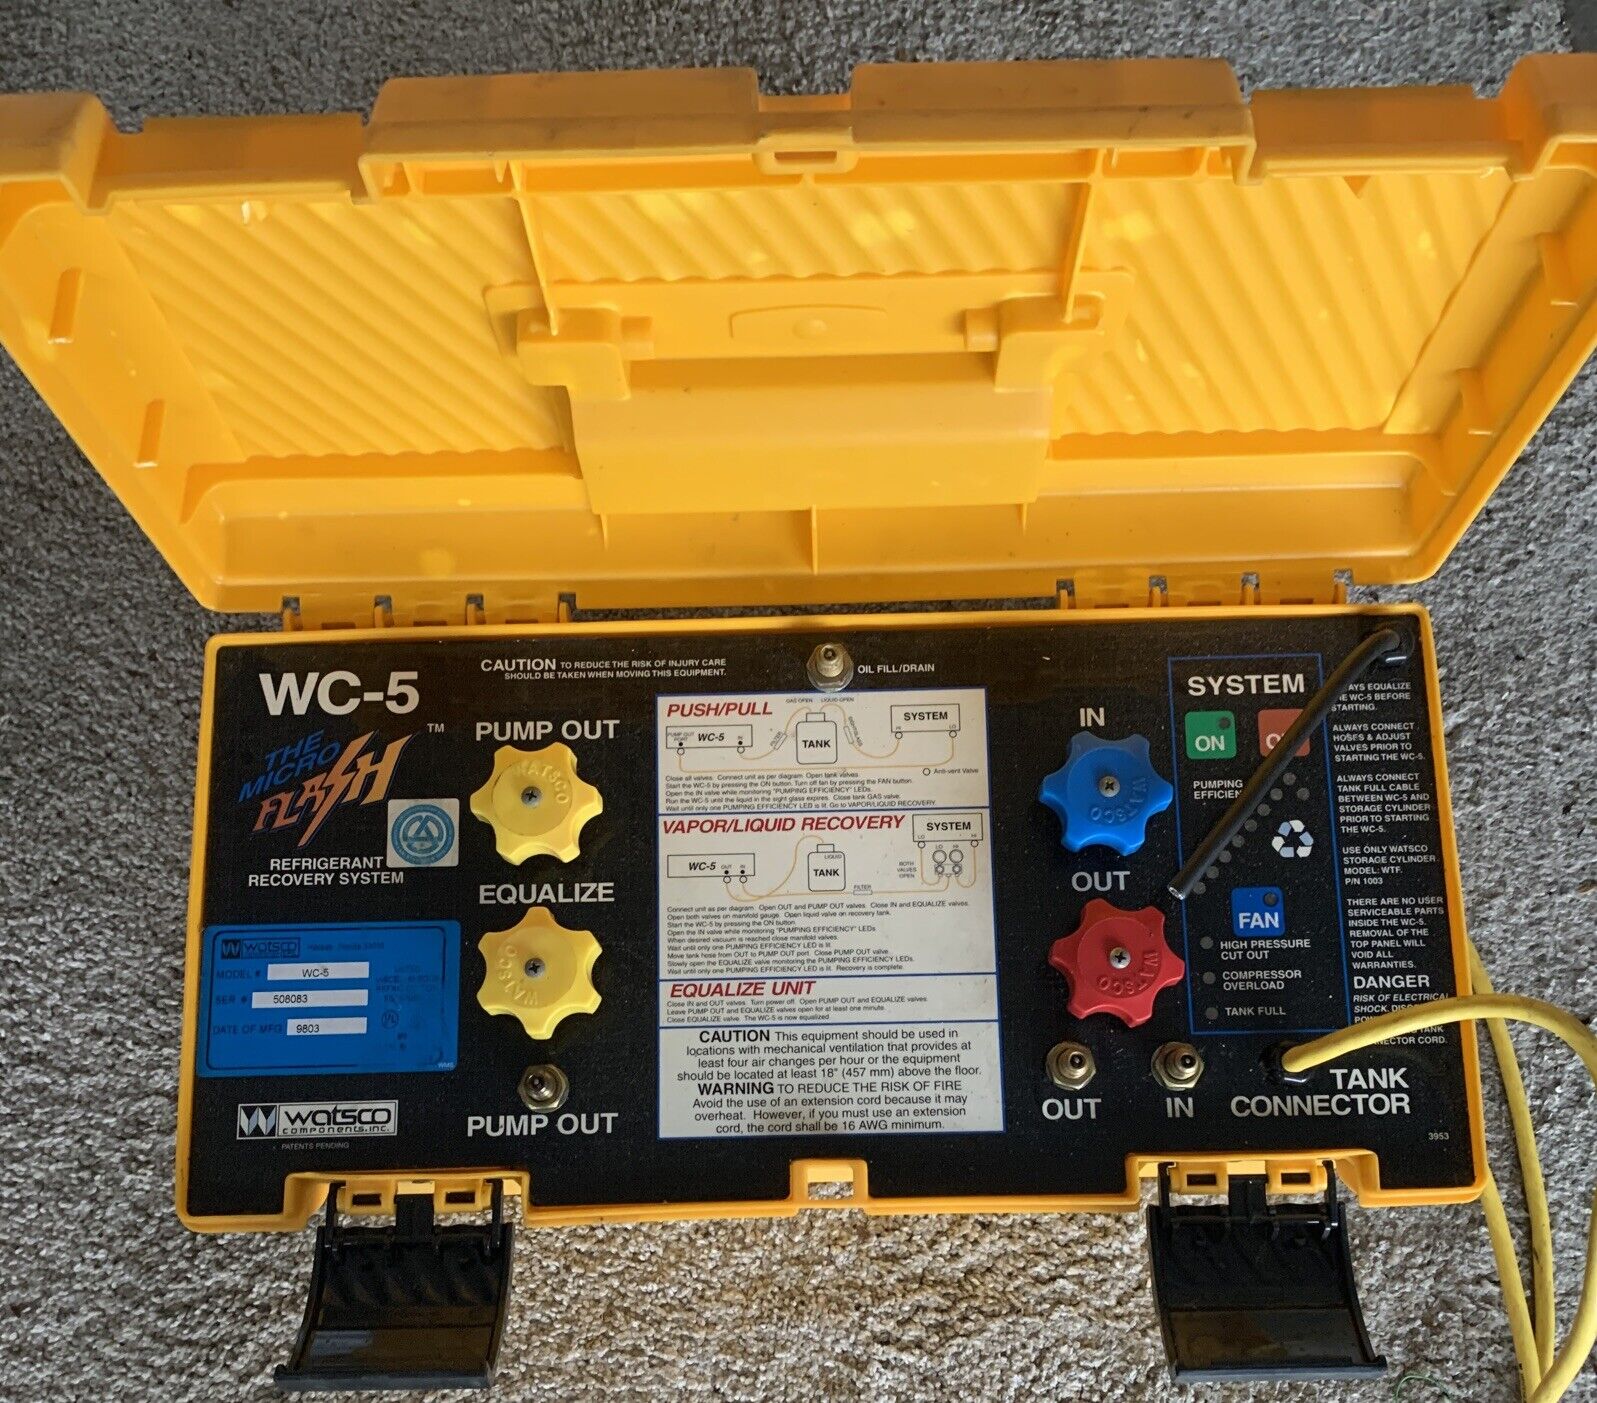 Watsco WC-5 Refrigerant Recovery System - The Micro Flash Untested